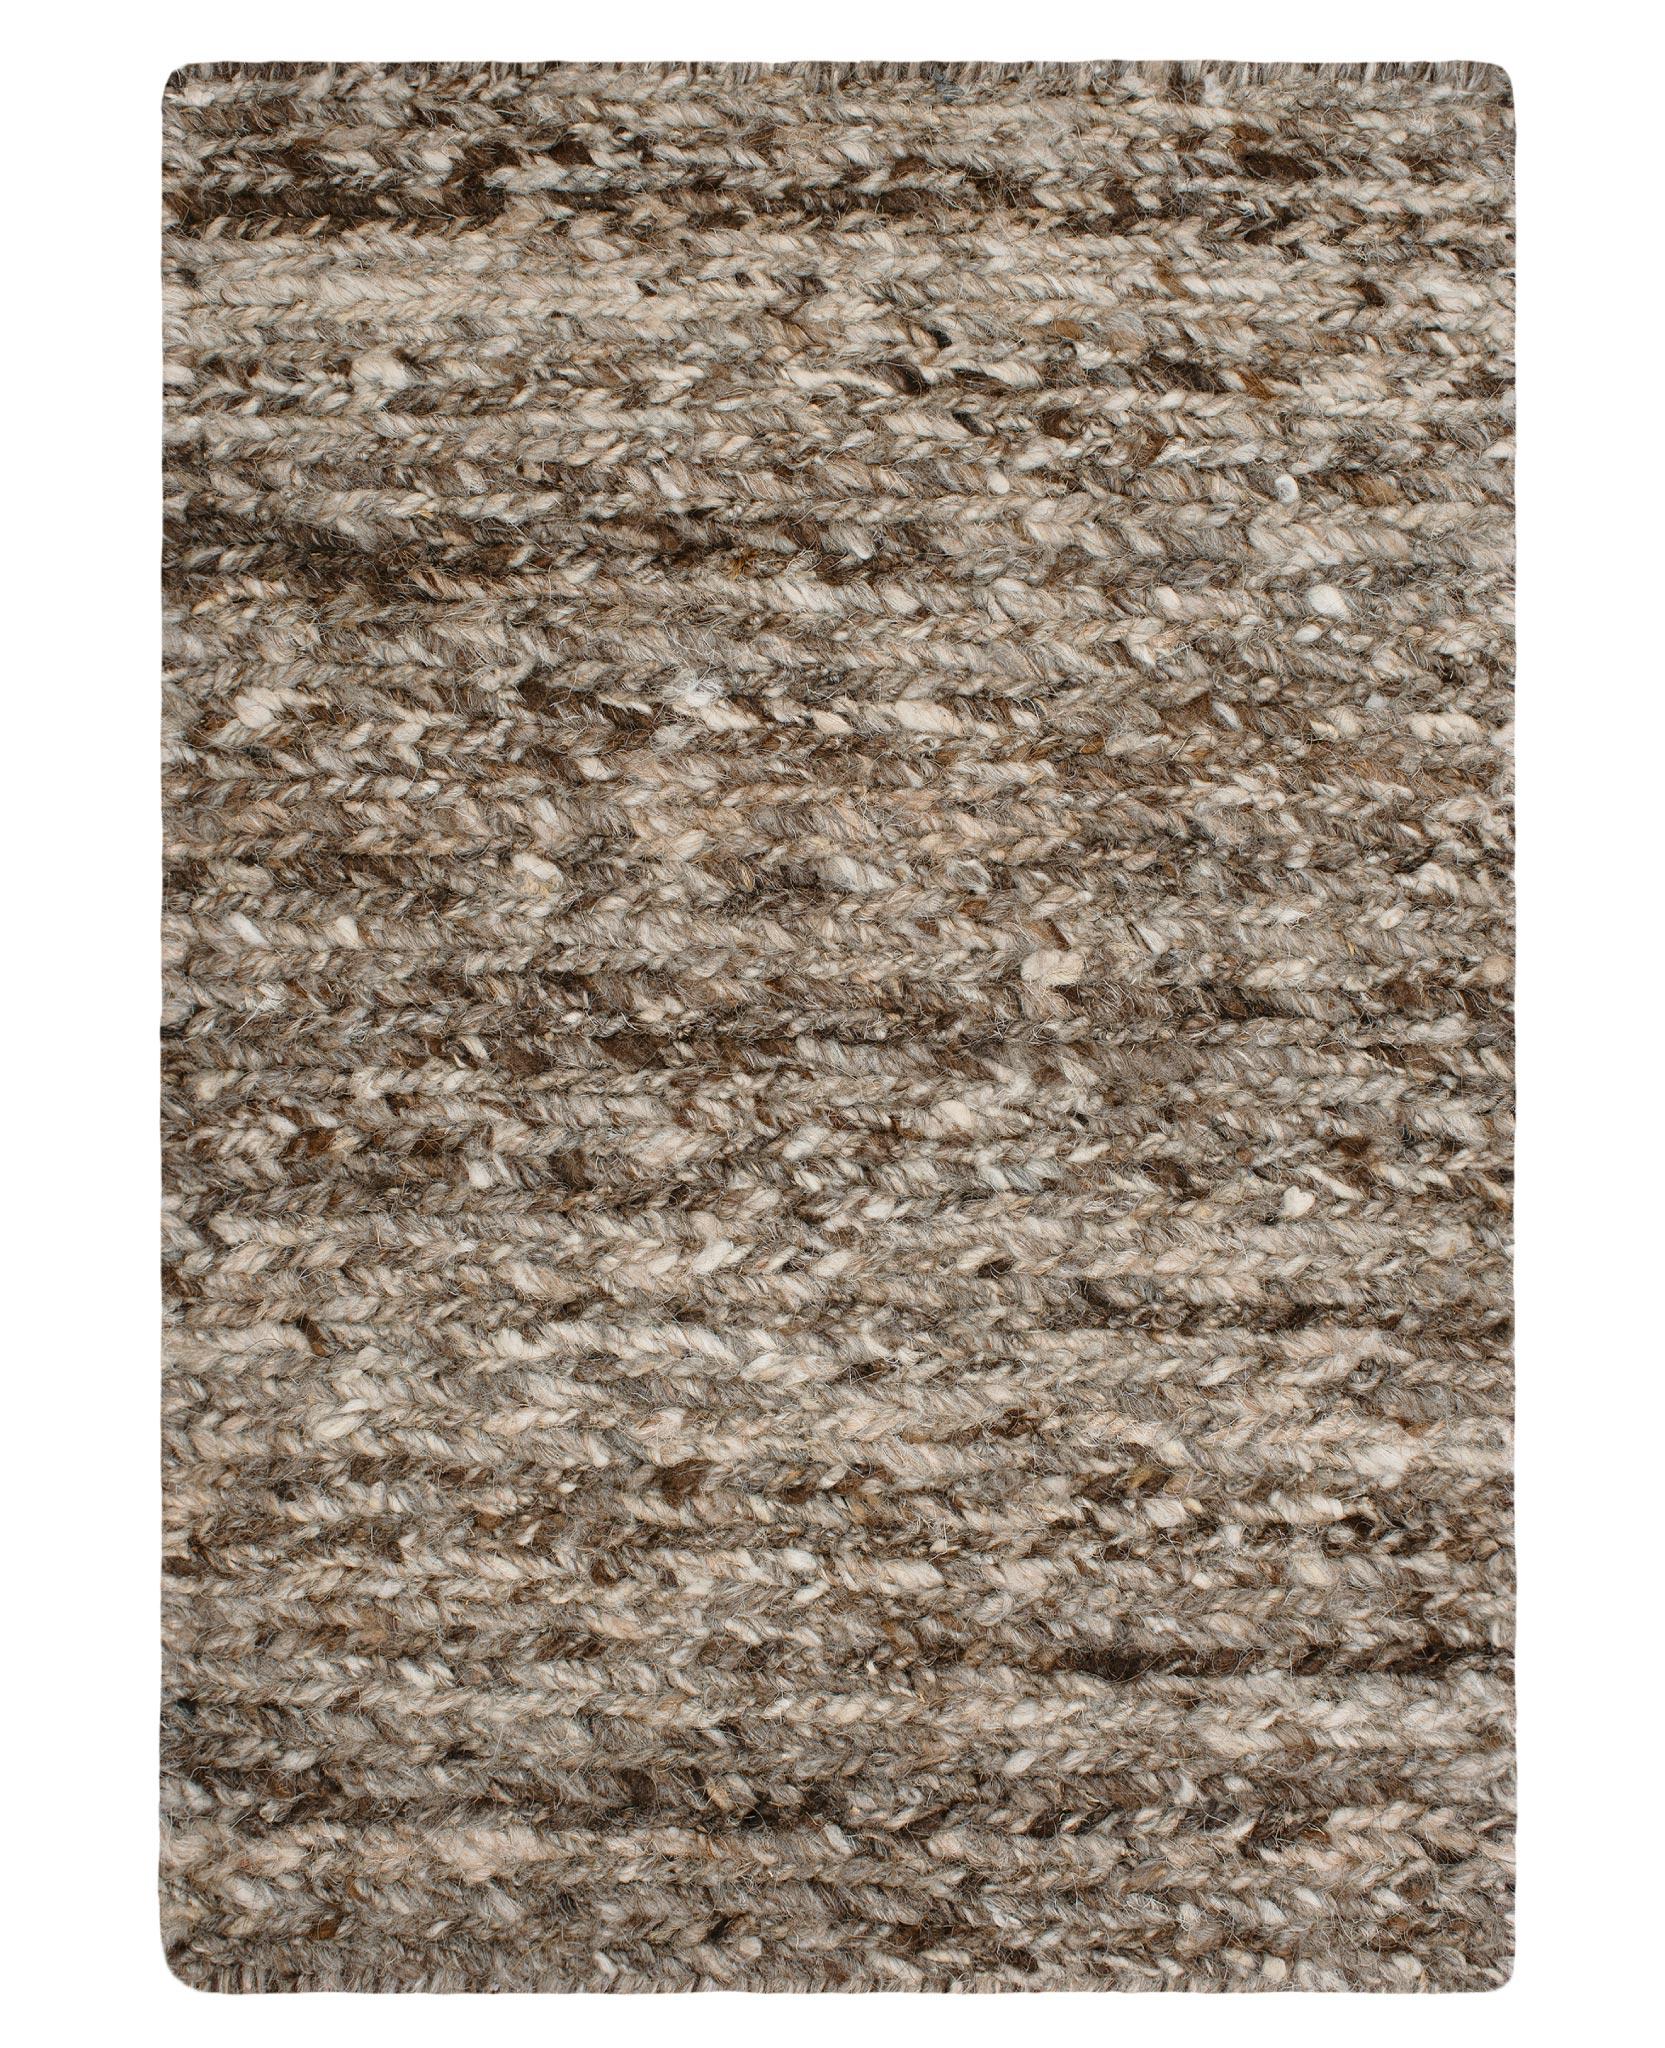 COLOUR: Natural Black
MATERIAL: 100% Un-dyed wool
QUALITY: Sumac flatweave
ORIGIN: Hand-Woven rug produced in Nepal
 
RUG SIZE DISPLAYED: 200cm x 300cm

Part of the Knots Rugs Textures collection, Chunky Sumac is a handwoven sumac rug produced in